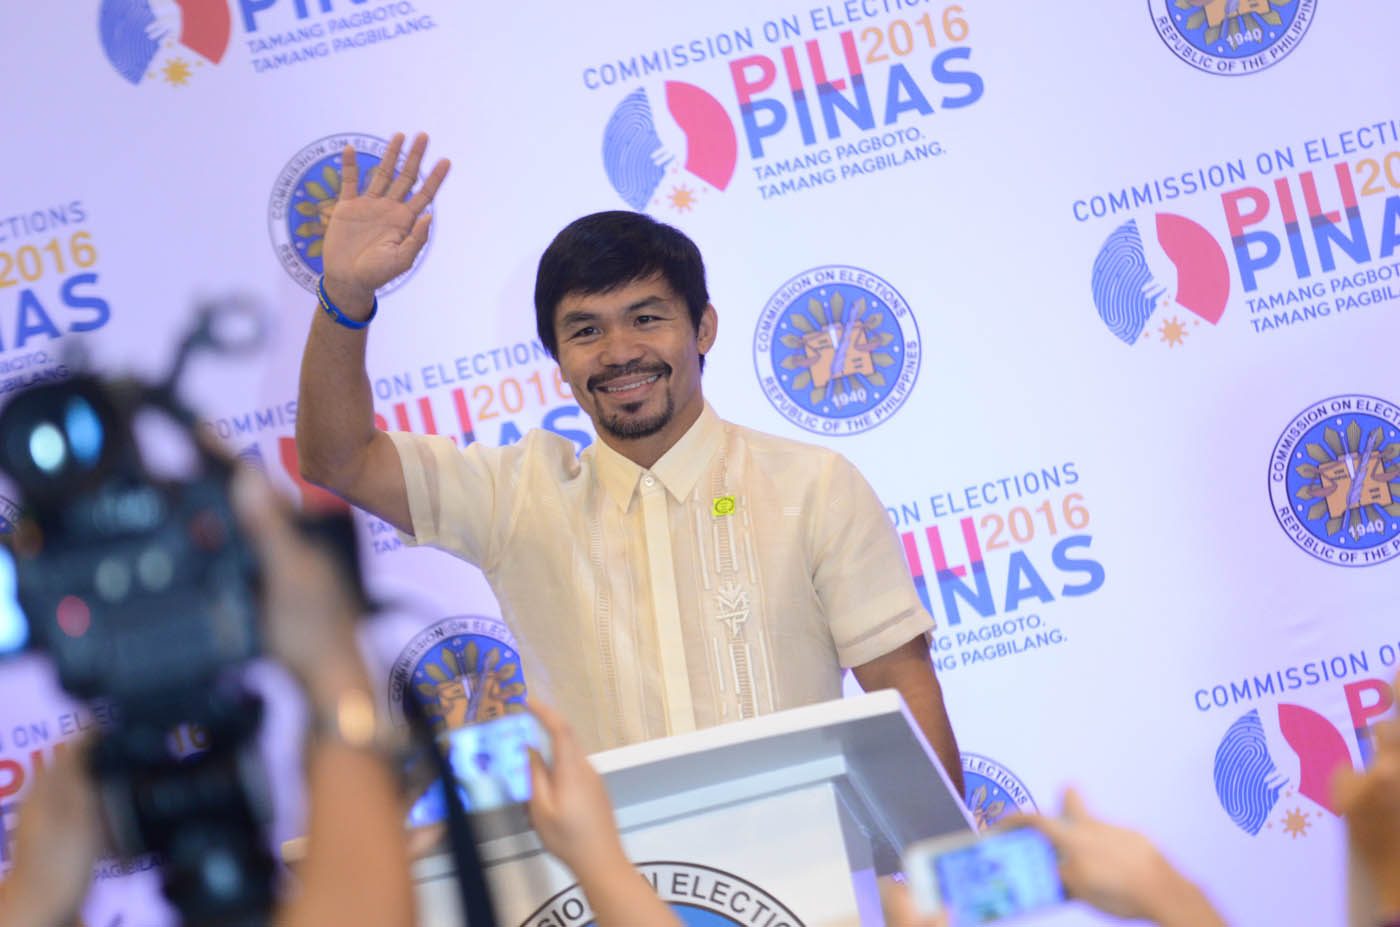 After 6 years, court lifts P3 billion tax sanction on Pacquiao